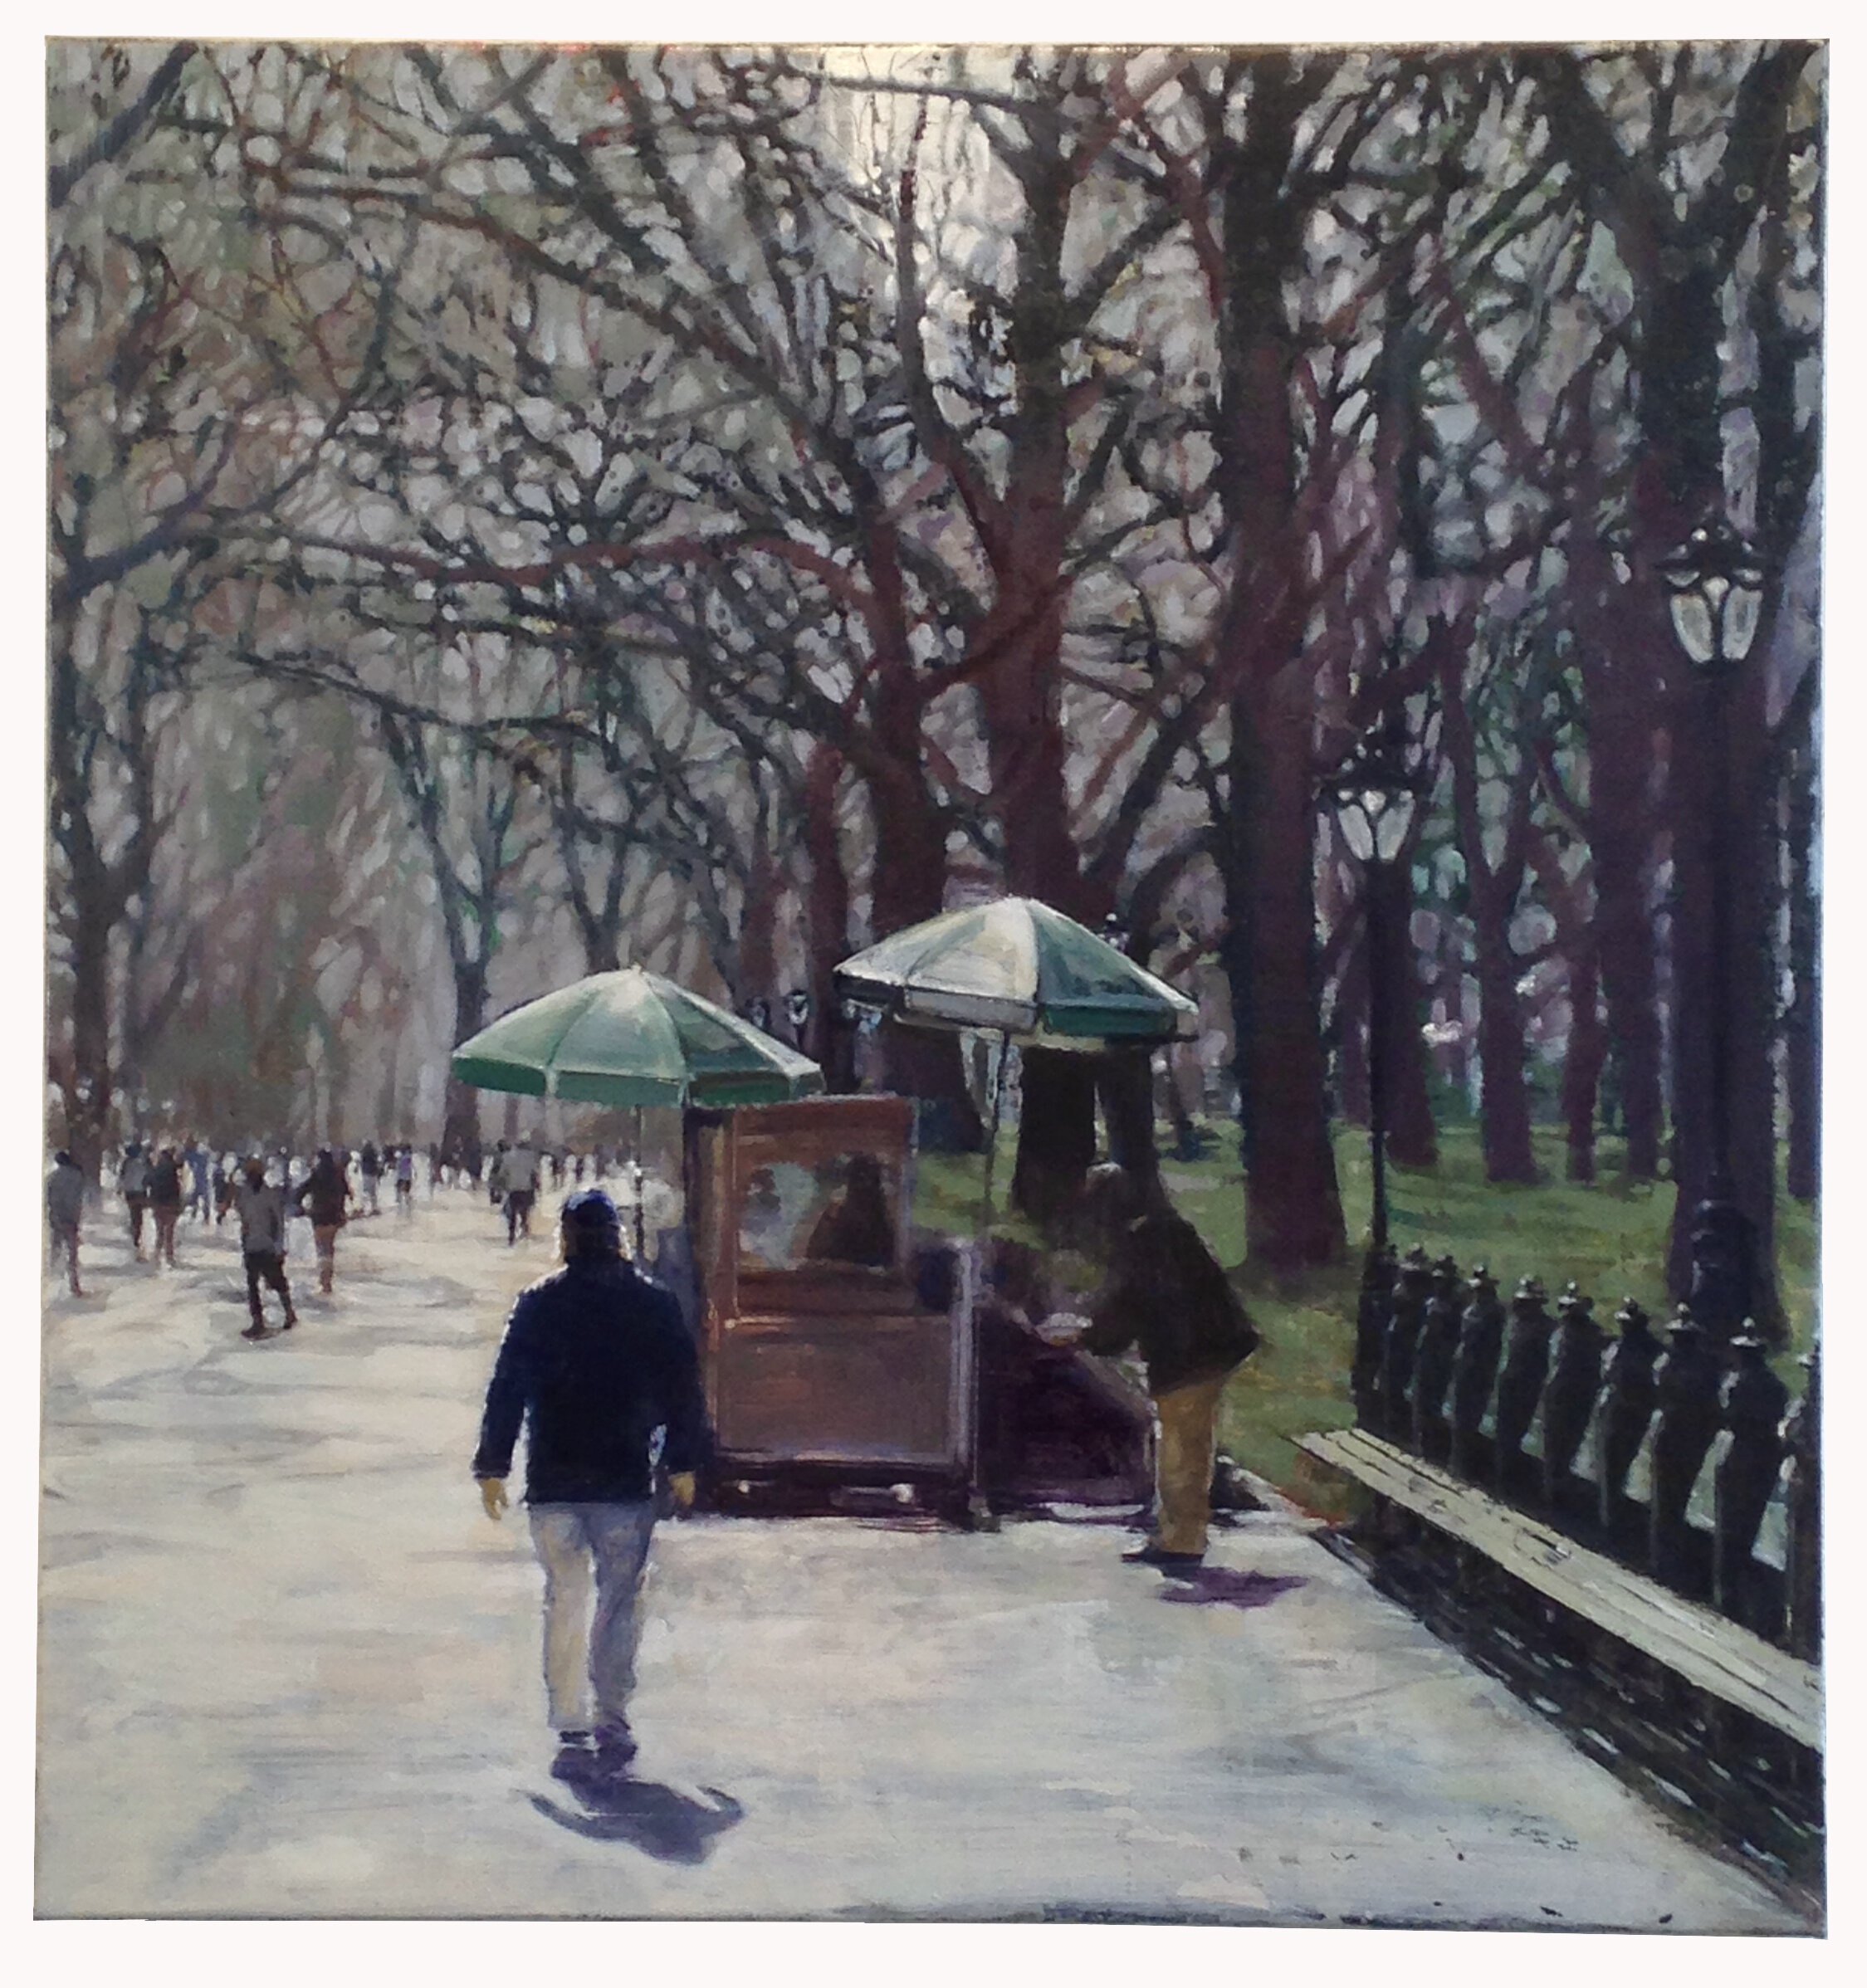  Central Park 1 38 x 35 inches (95 x 90 cm) Oil on linen 2017 